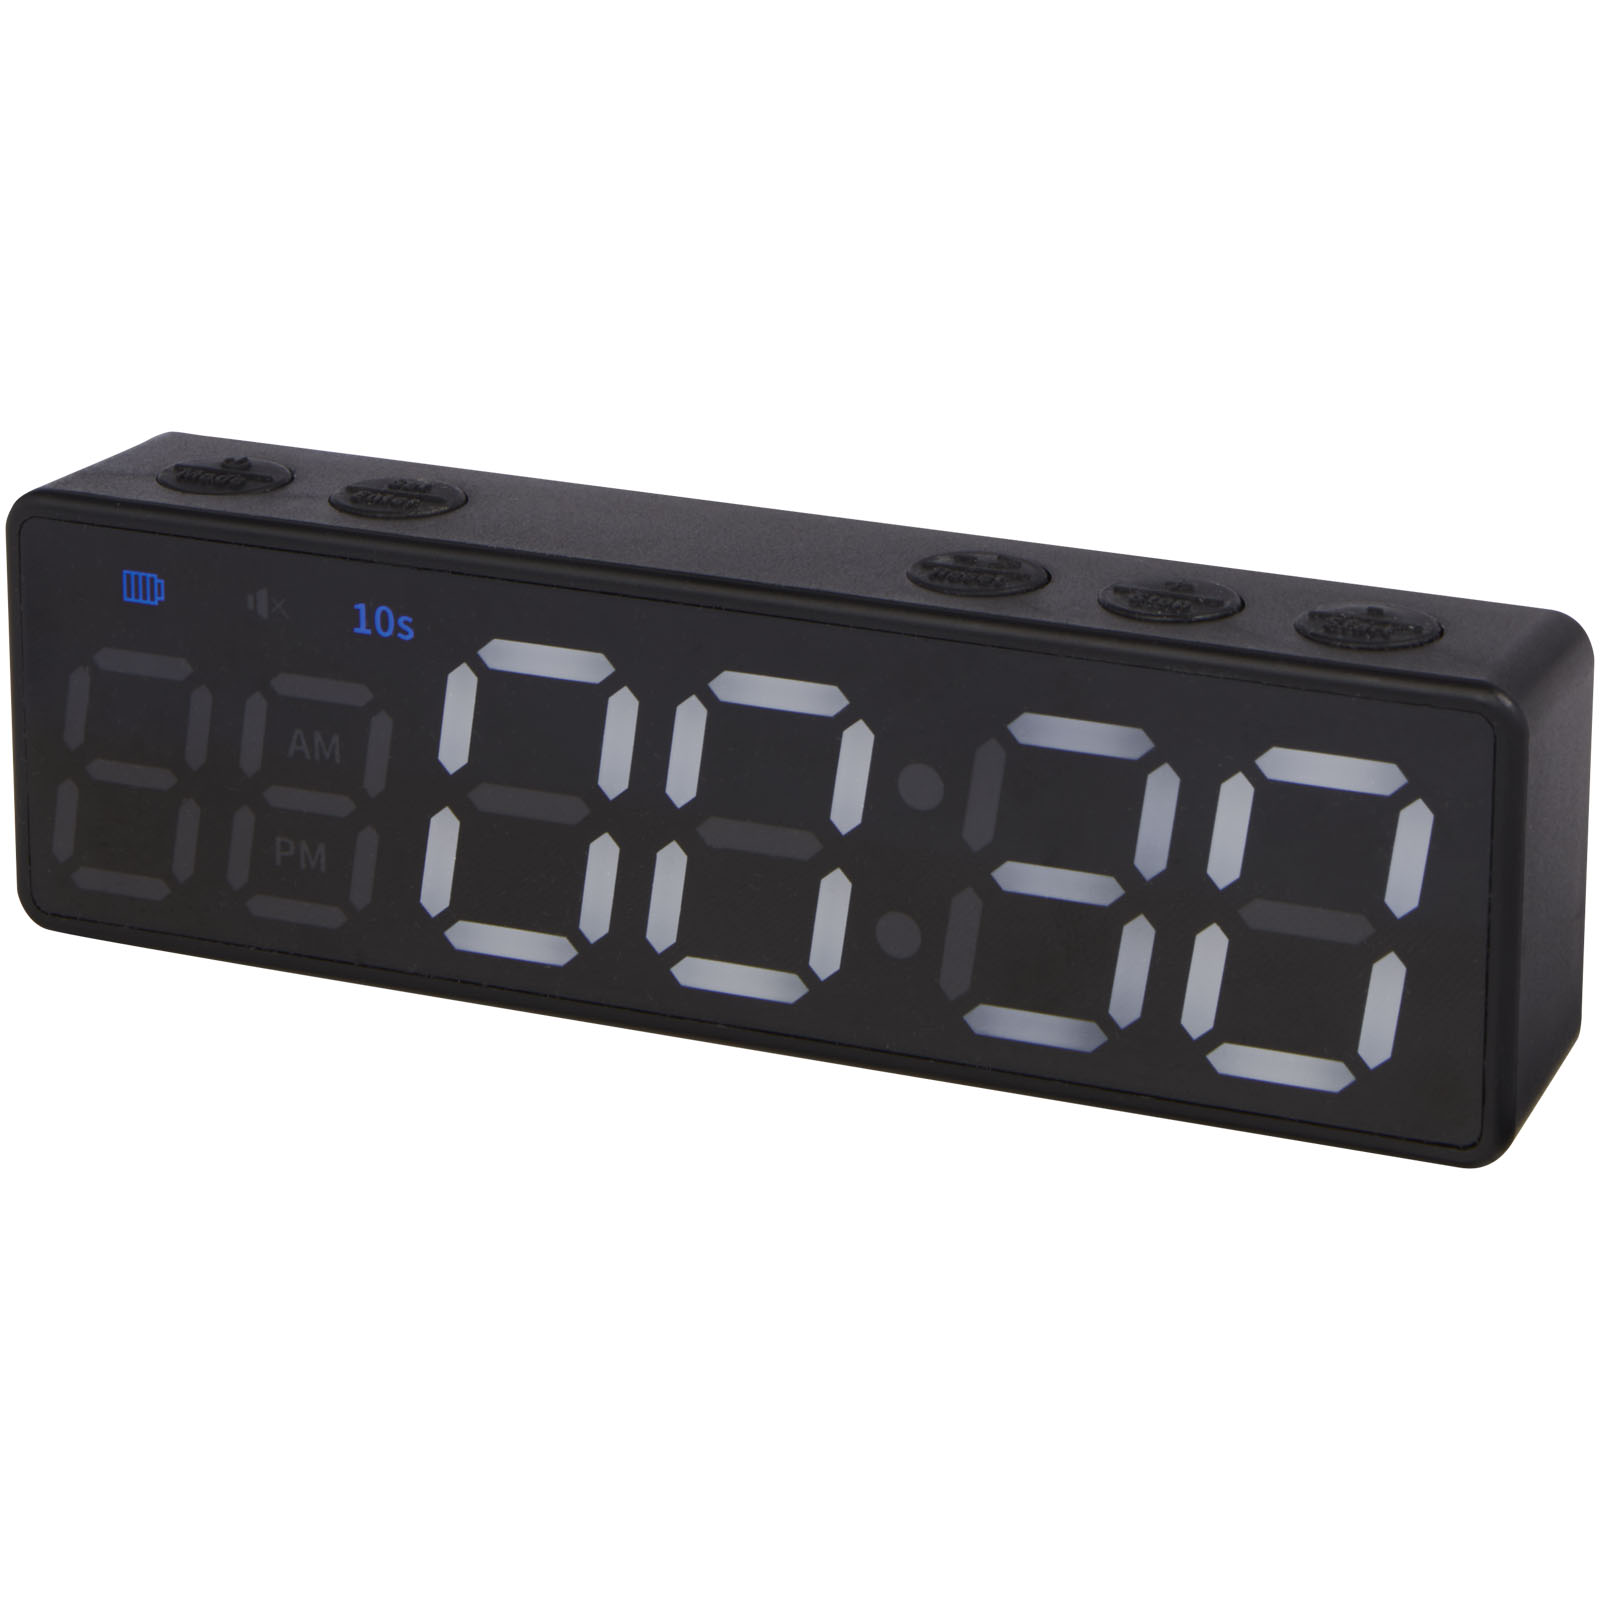 Training Timer with 12 Functions - Darlaston